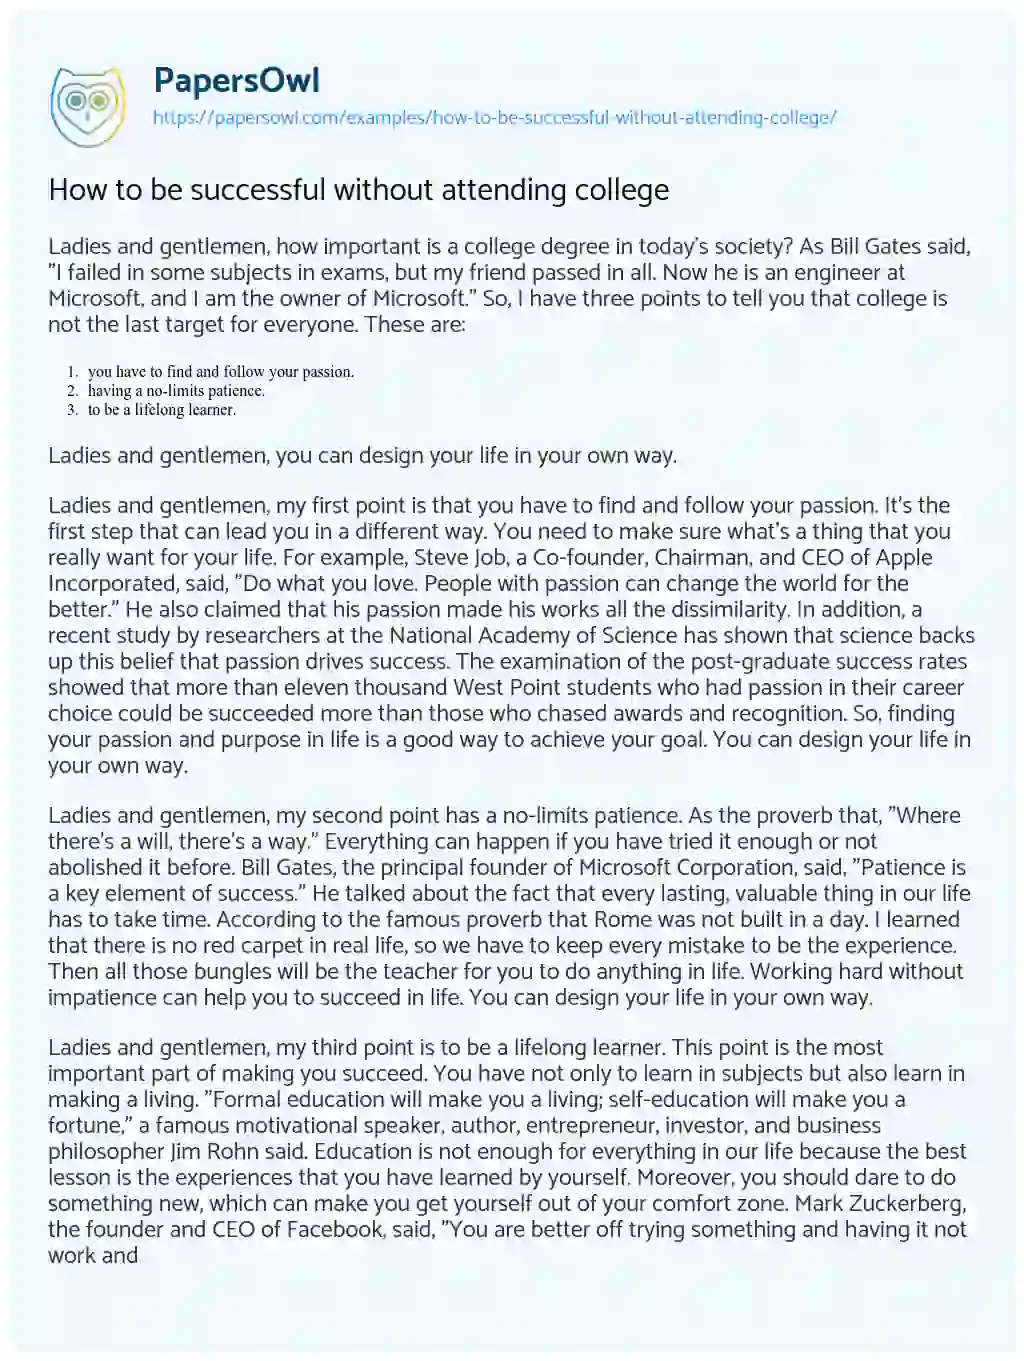 How to be Successful Without Attending College essay